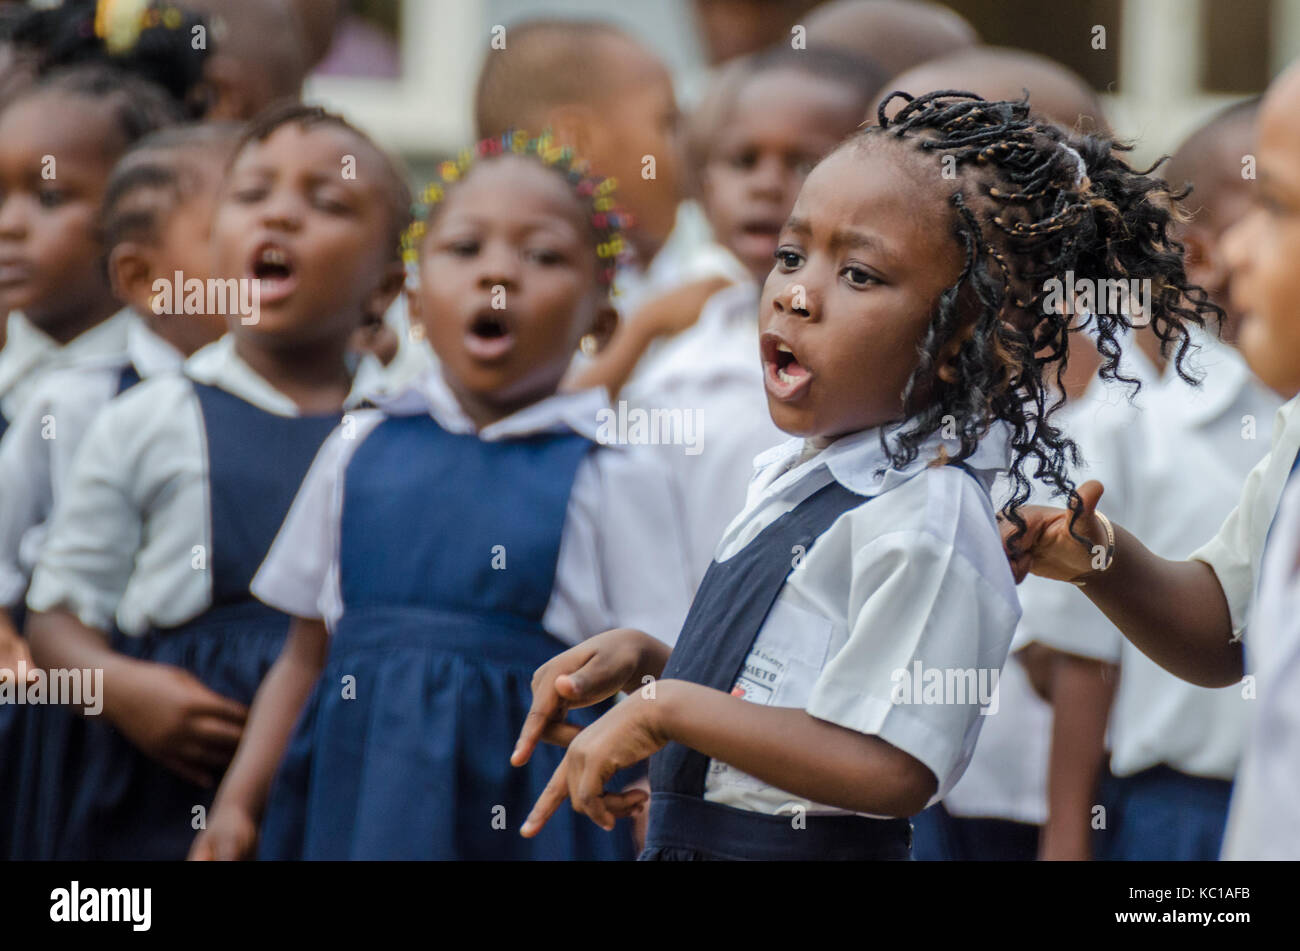 Young African school girl with beautifully decorated hair singing and dancing at pre-school in Matadi, Congo, Africa Stock Photo